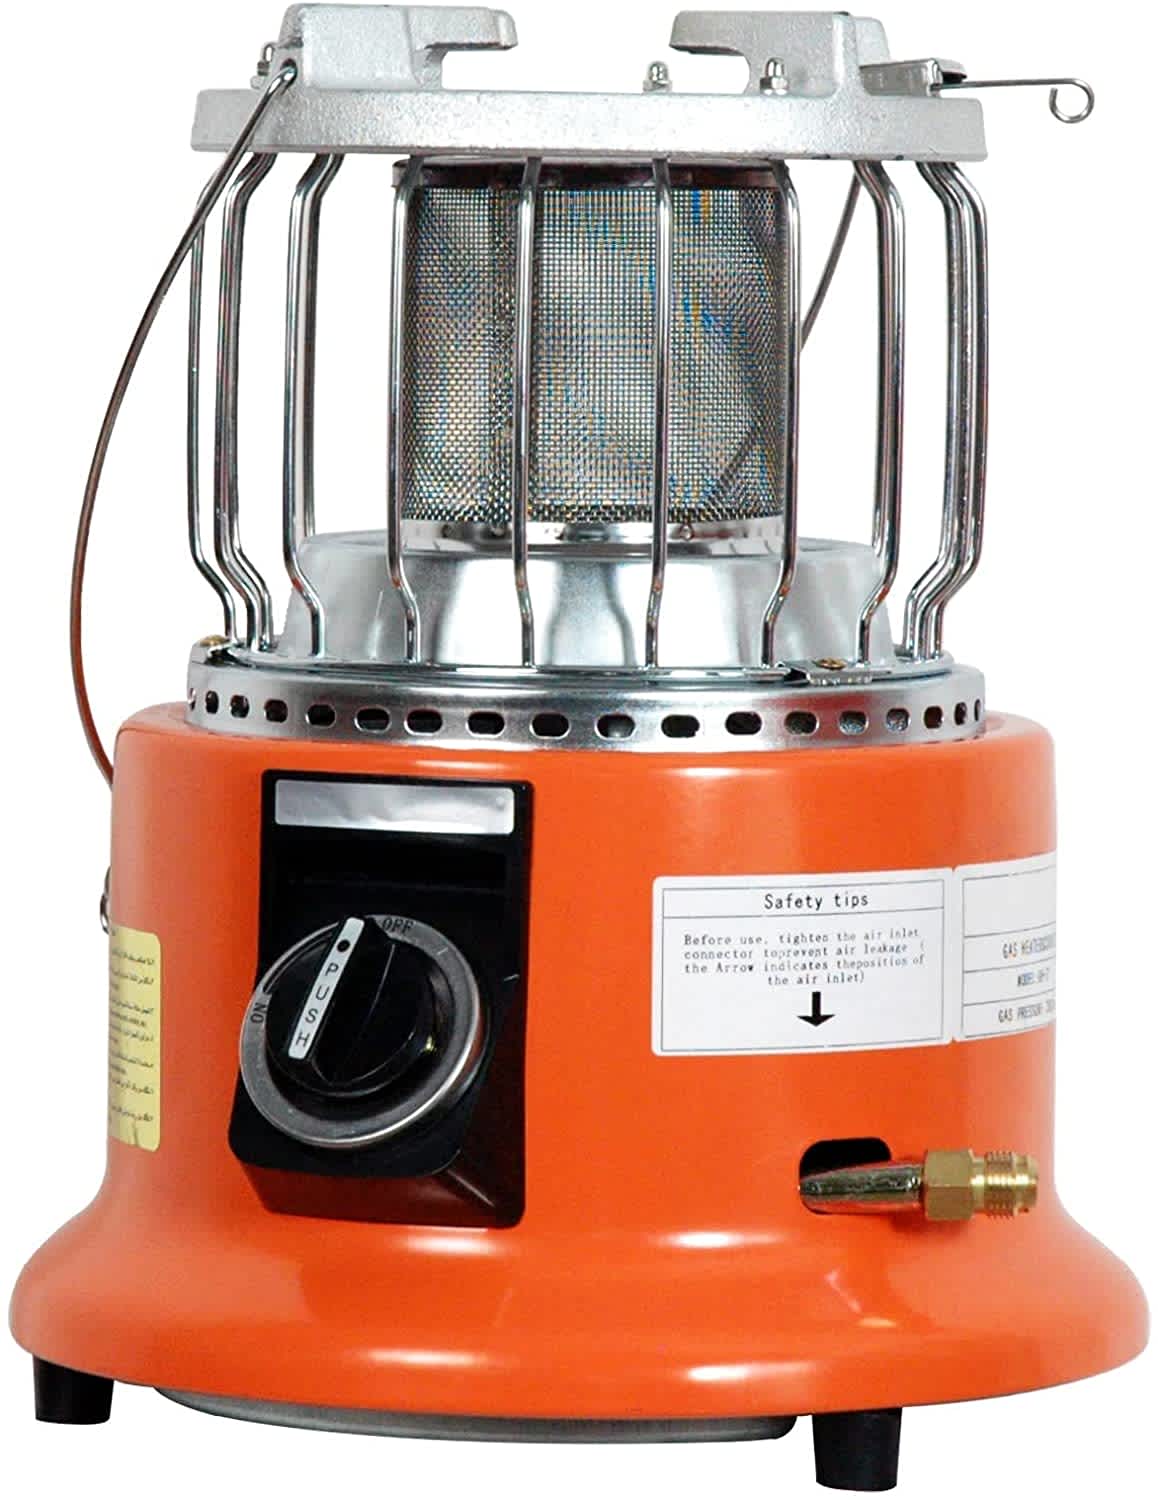 Propane Outdoor Space Heater and Camping Stove